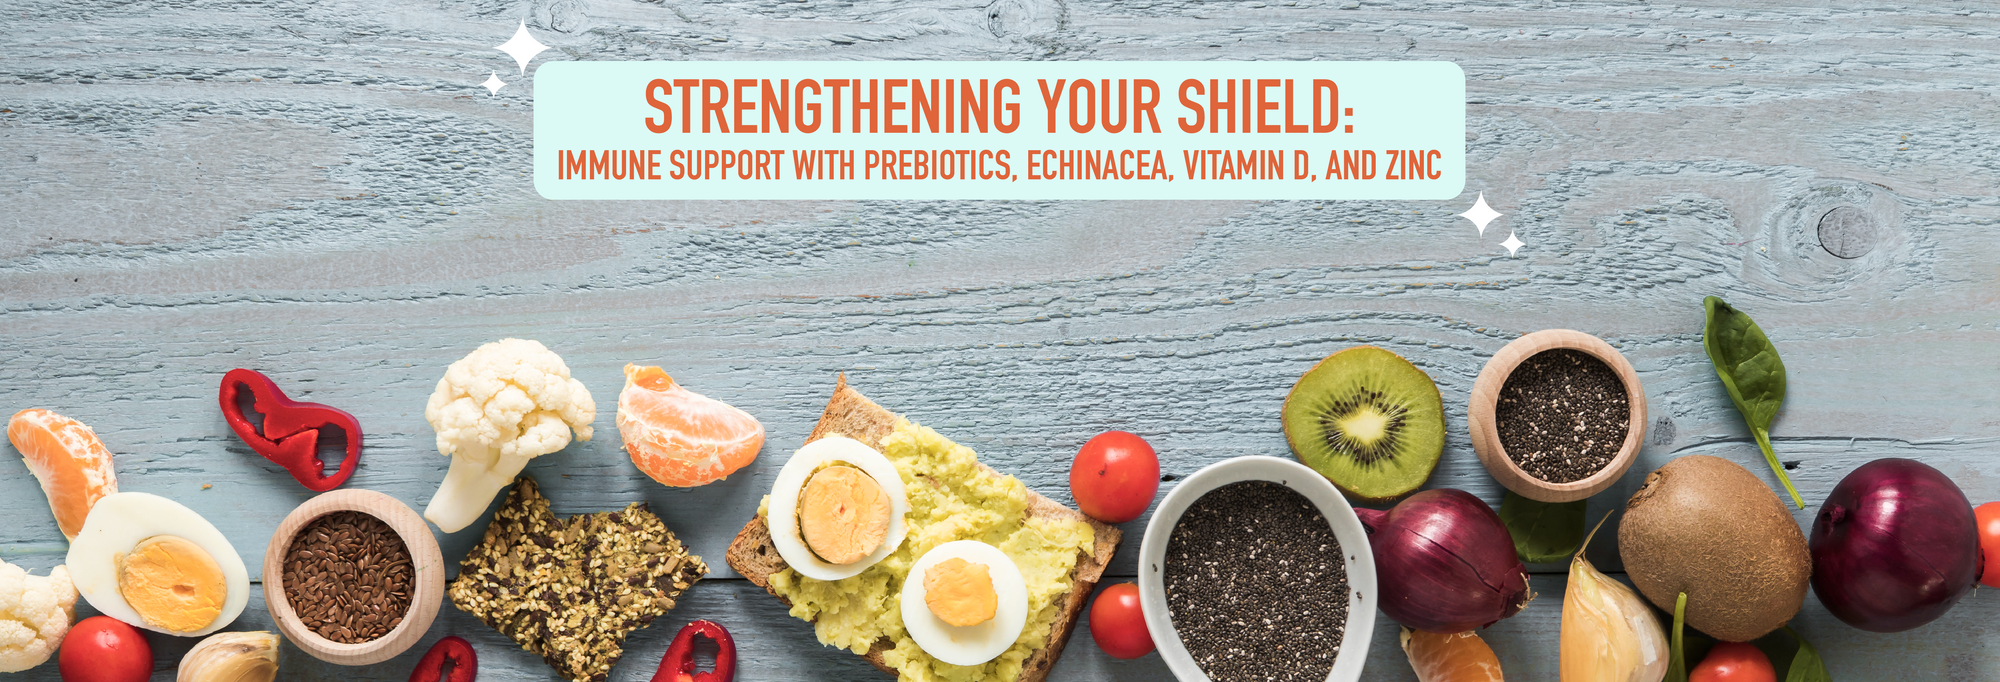 Strengthening Your Shield: Immune Support with Prebiotics, Echinacea, Vitamin D, and Zinc